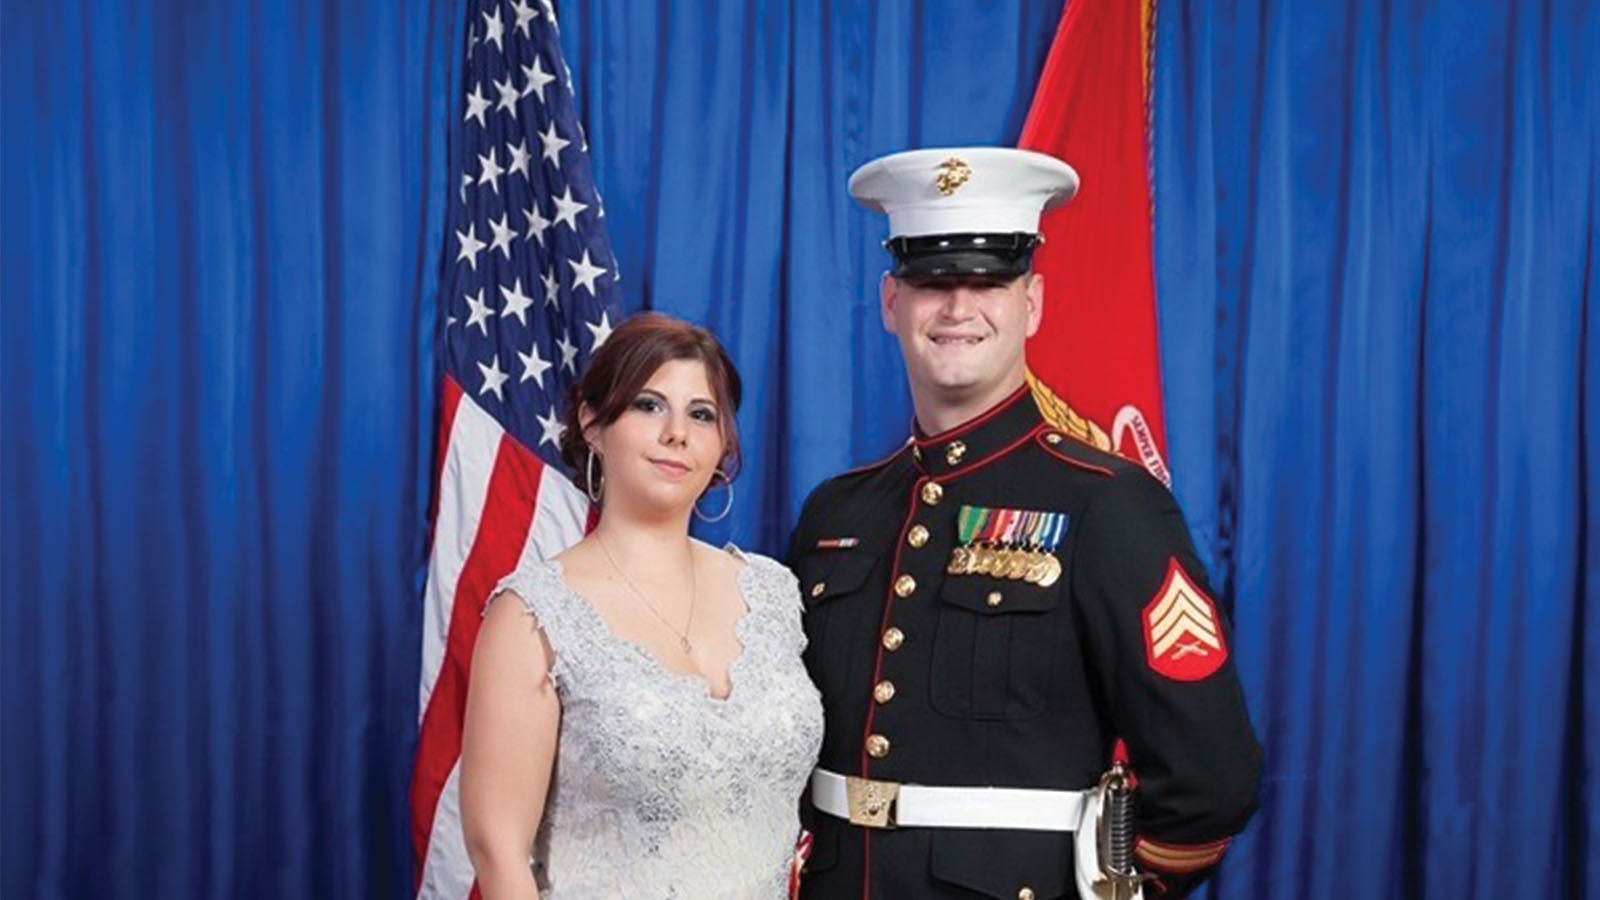 Couple pictured standing in front of two flags.